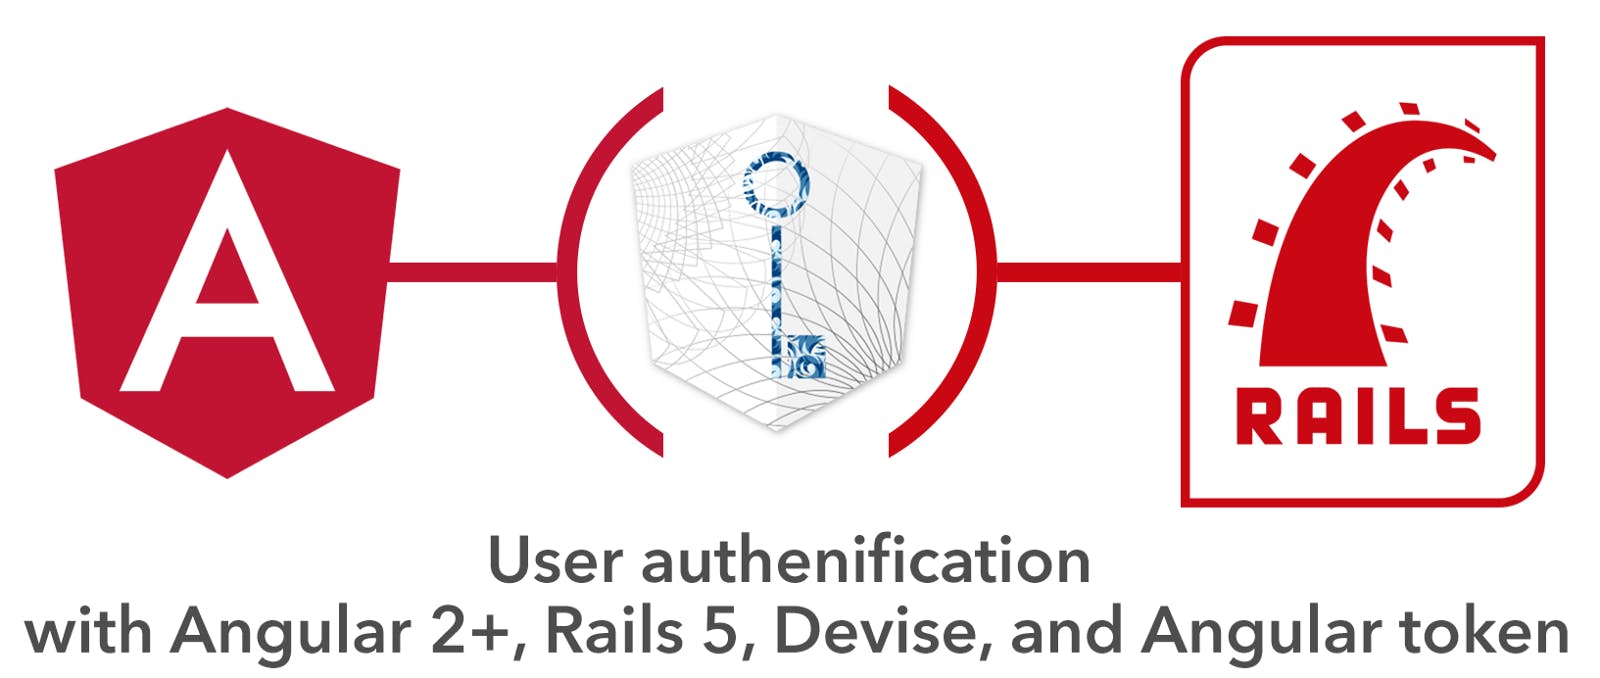 featured image - Angular 2+ and Ruby on Rails user authentication